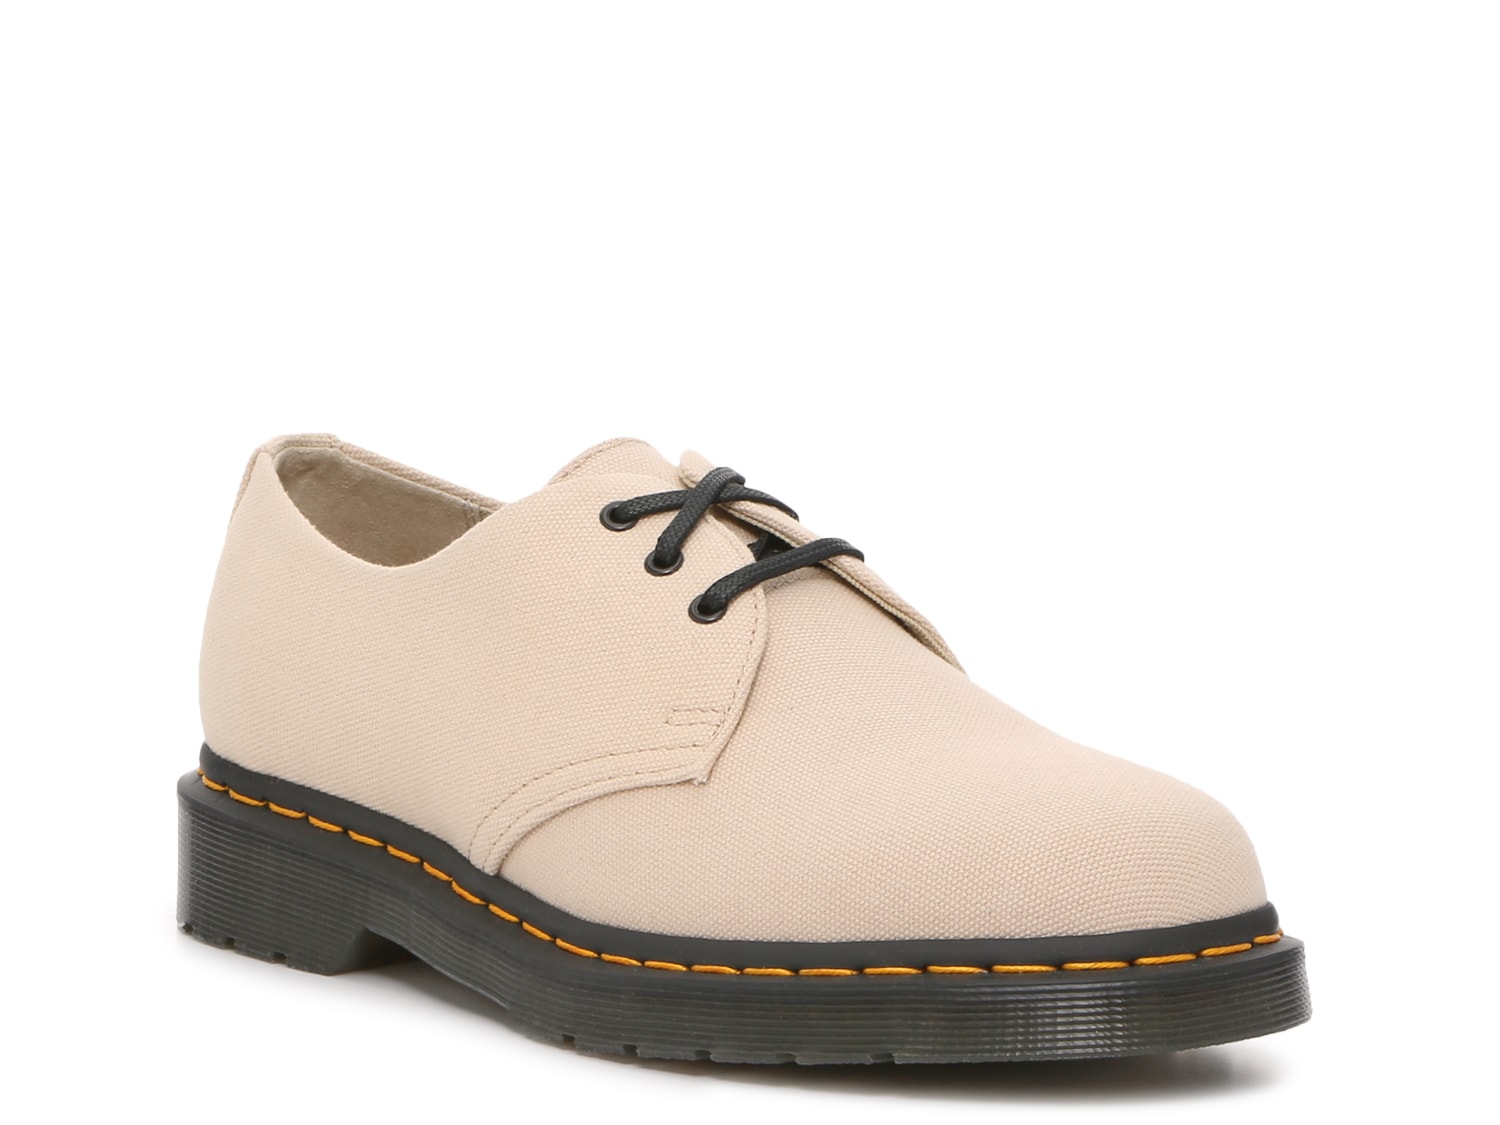 Dr. Martens 1461 Canvas Oxford - Free Shipping | DSW